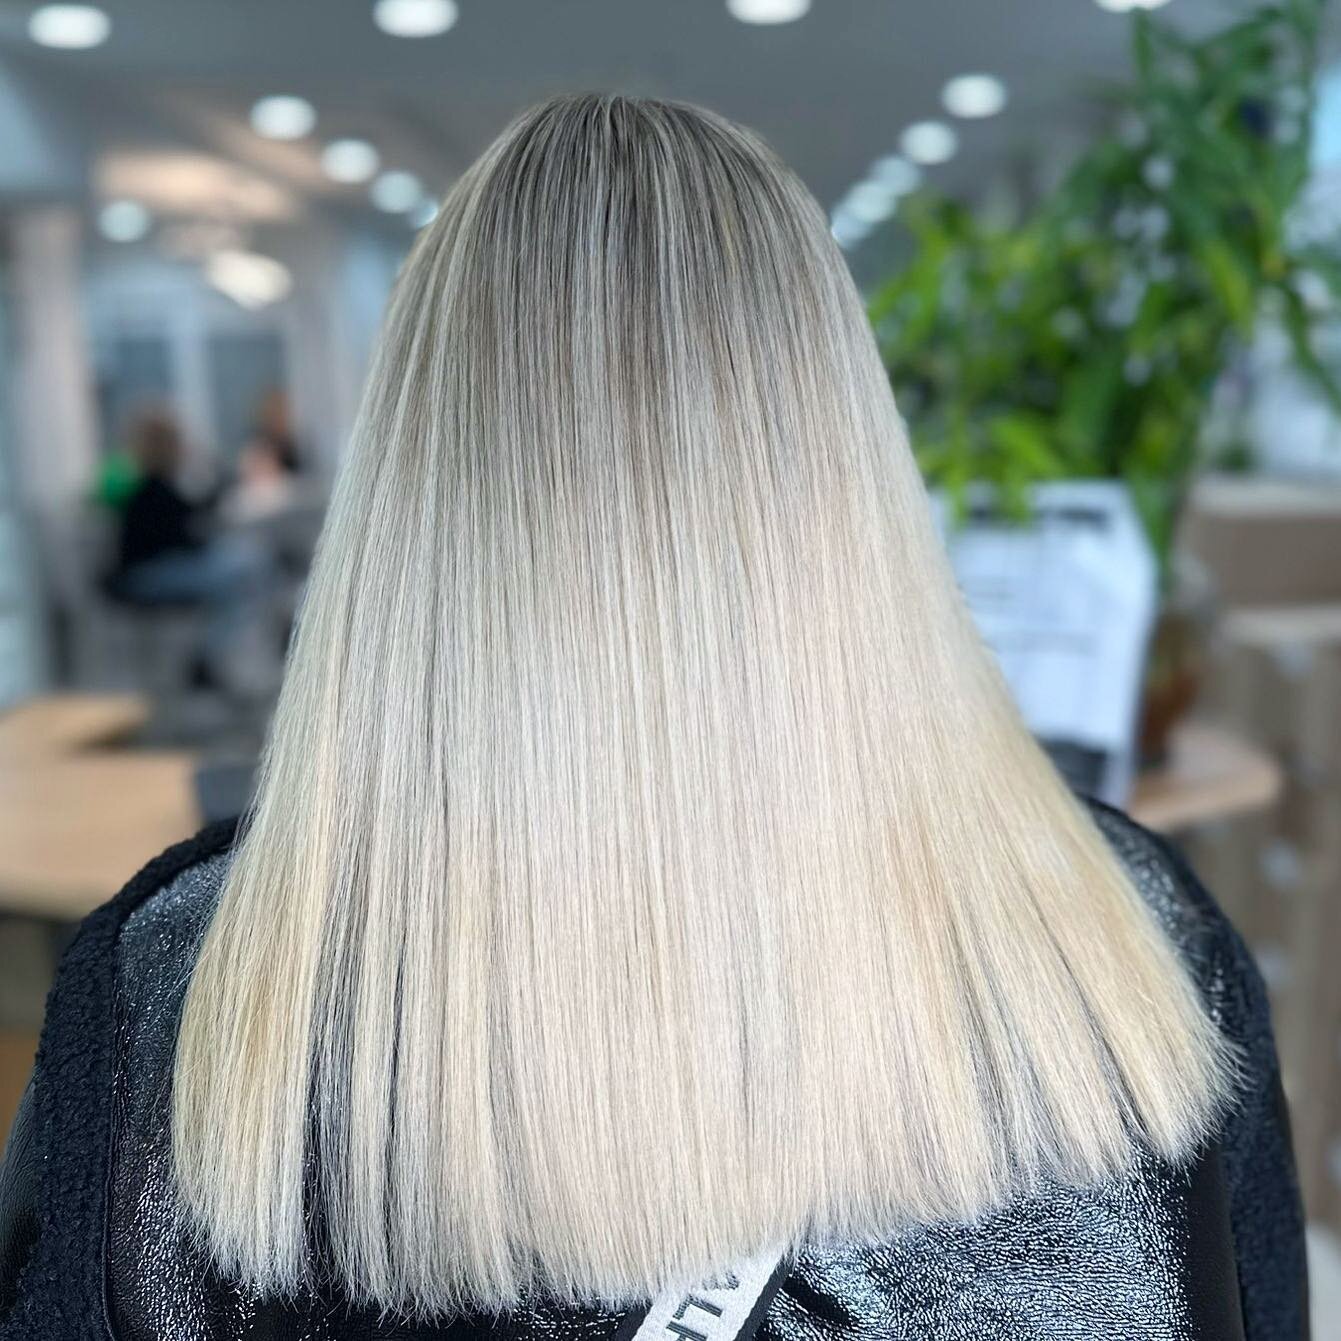 Go straight to the beautiful balayage .&rdquo;💫💫💫💫💫 hair done by: Oksana #blondbalayage #babylights #highlights #babylights #longhair #blondehair #goldblonde #balayage #ombrehair #brownhair #fadecolors #waveshair #blondhair #gold #wormblonde #sh